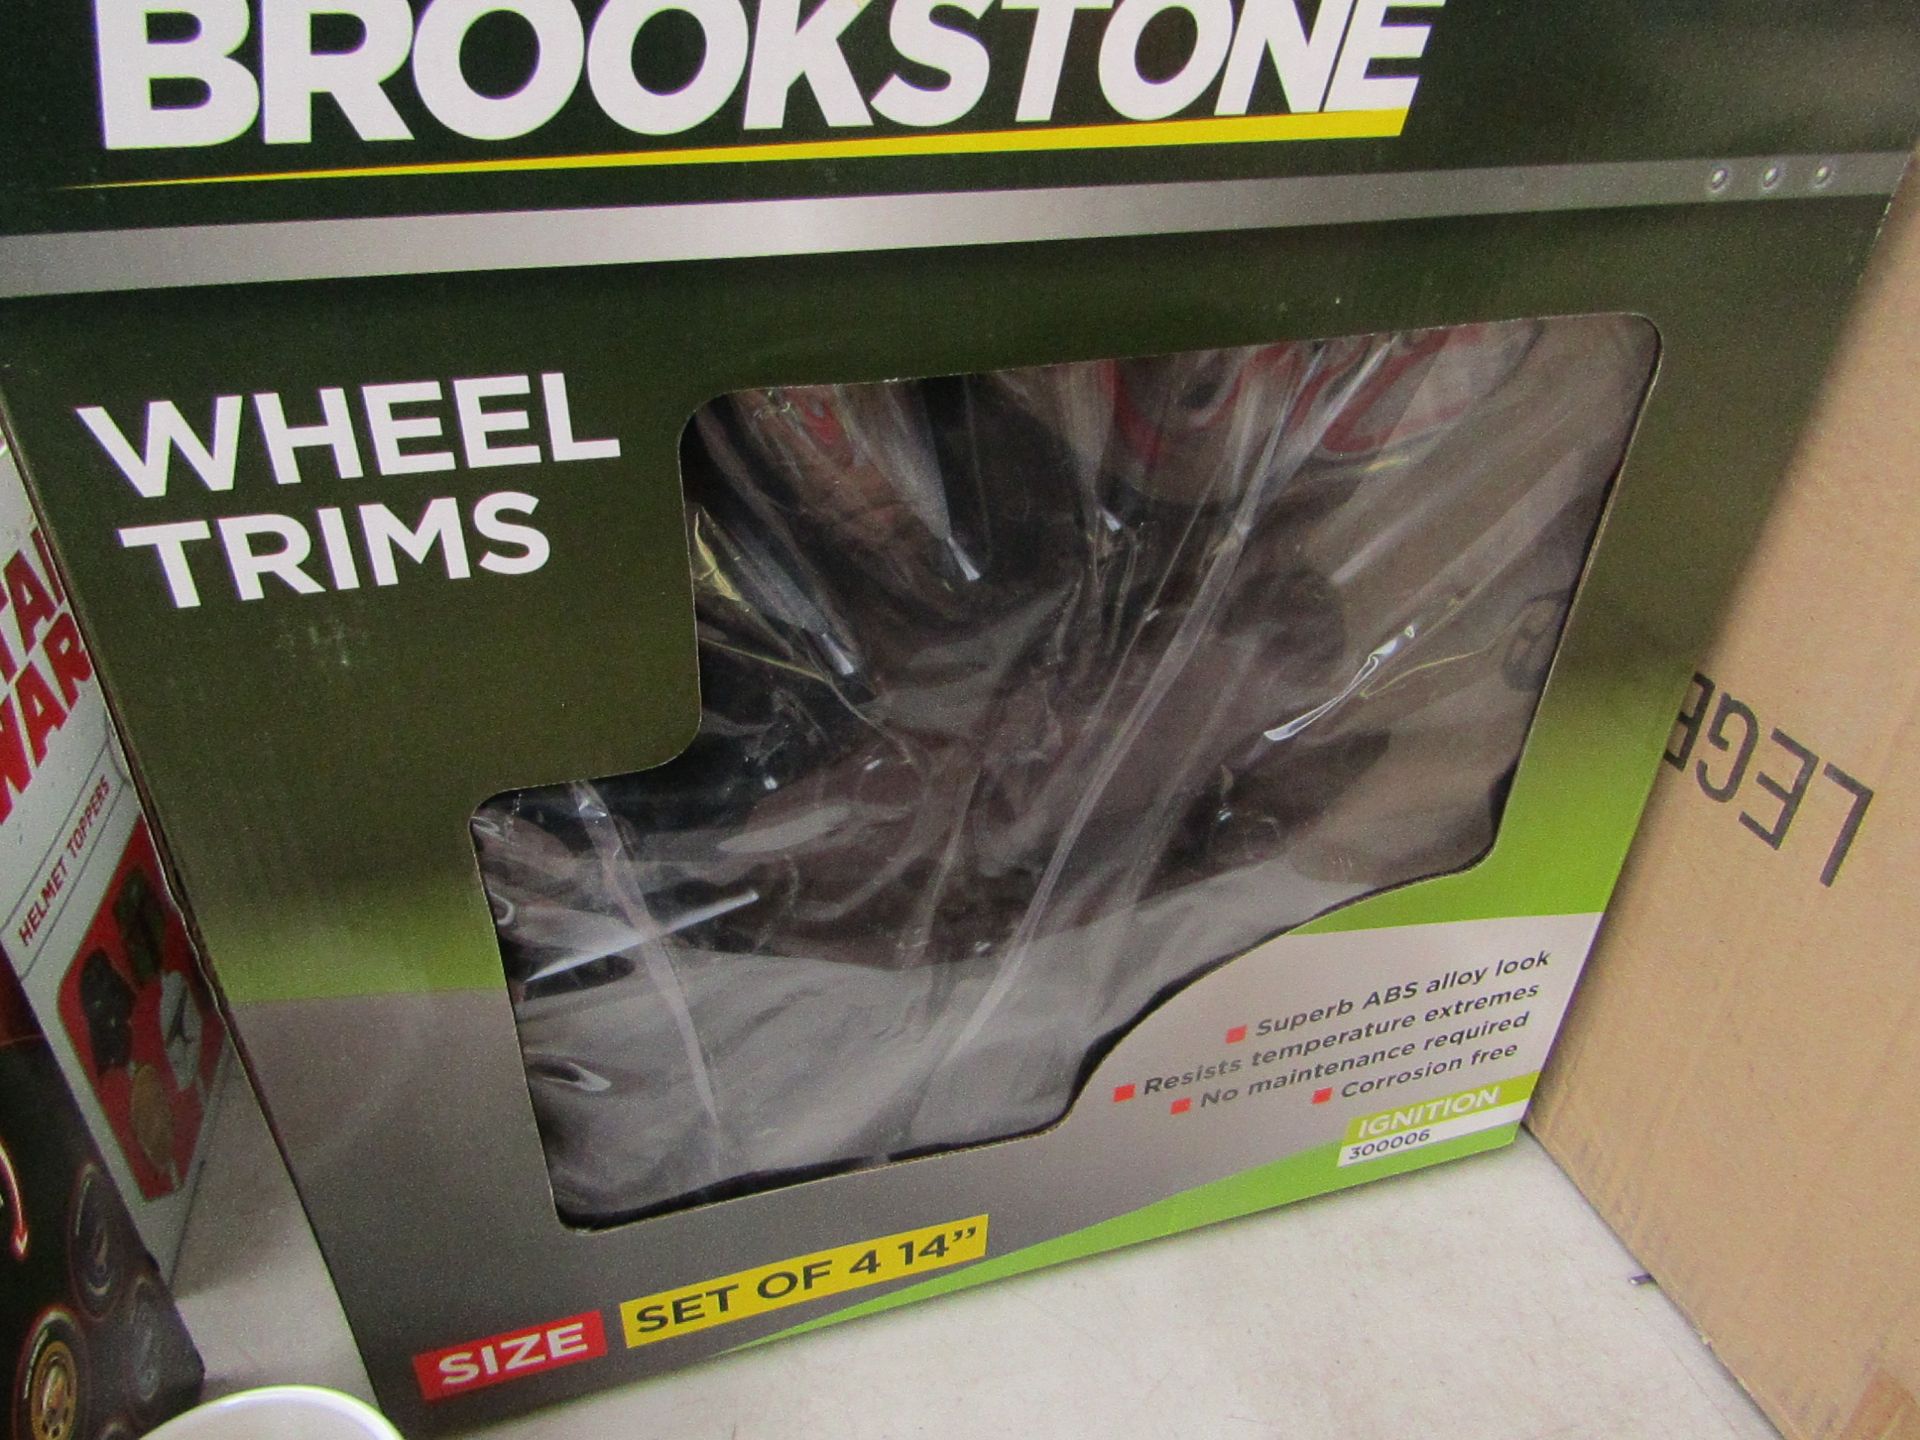 Brookstone - Ignition 14" Set Of 4 Wheel Trims - Unchecked & Boxed.